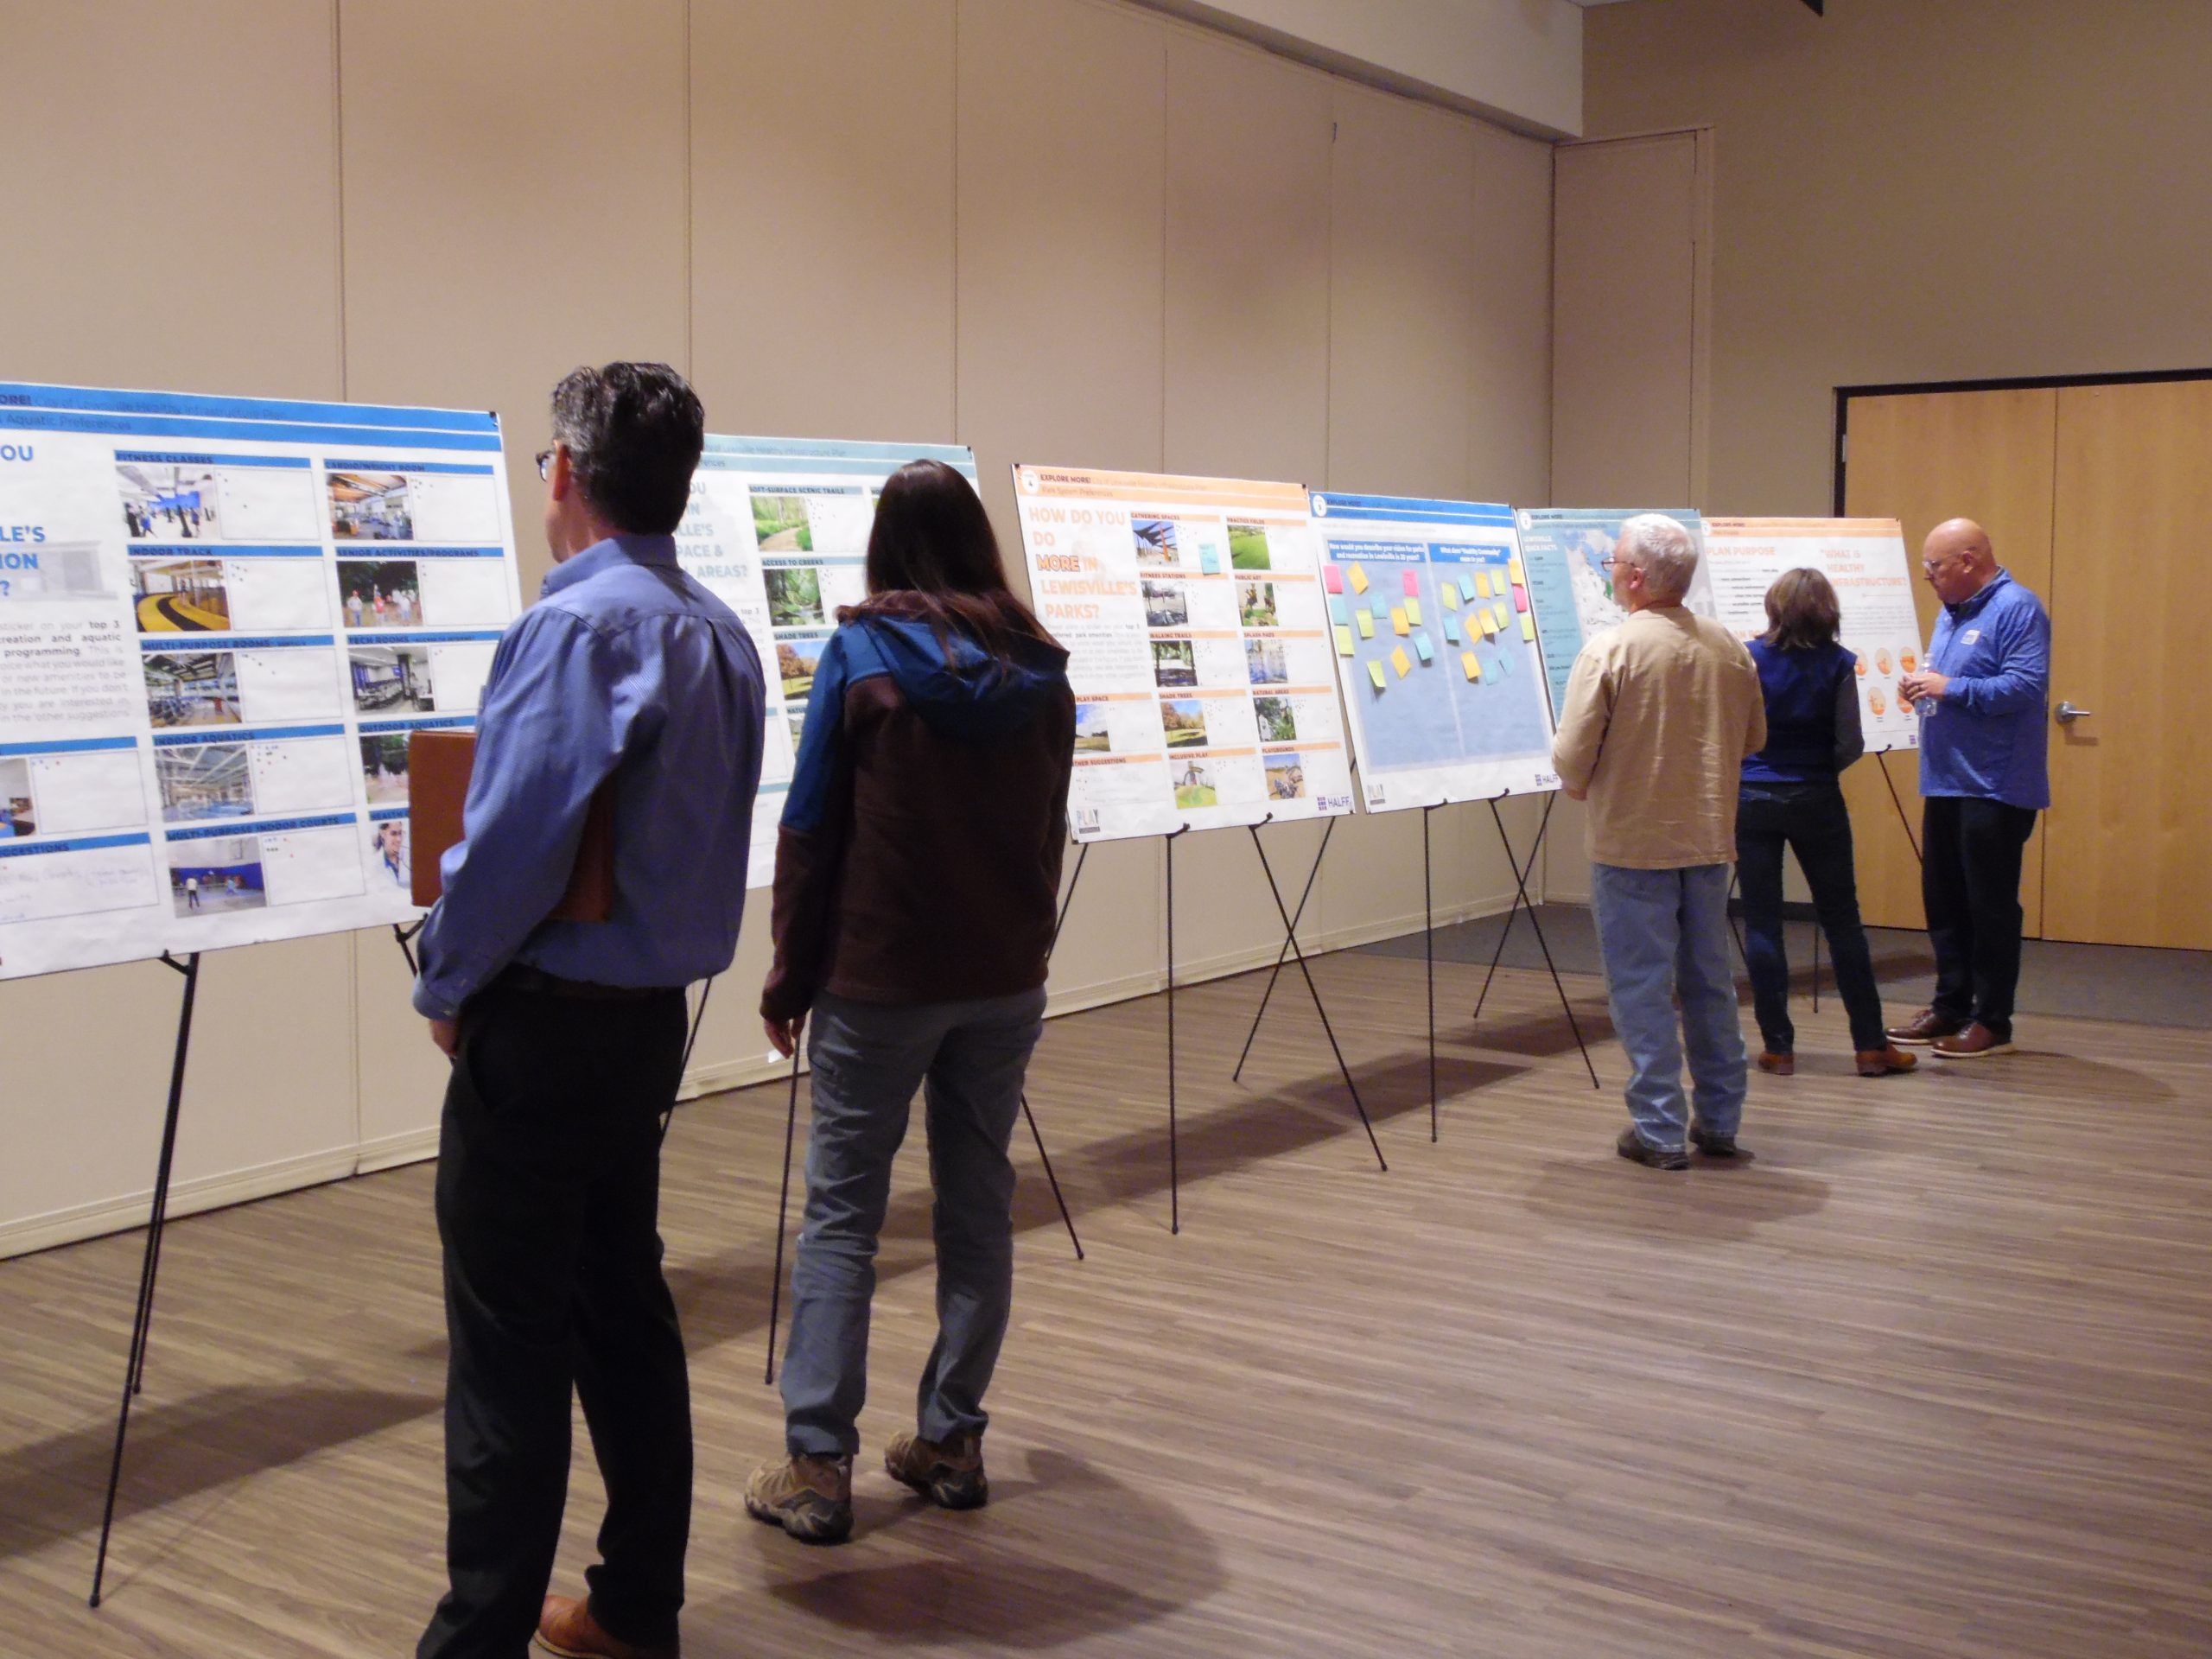 Community members reviewing visioning plan from Explore More Lewisville